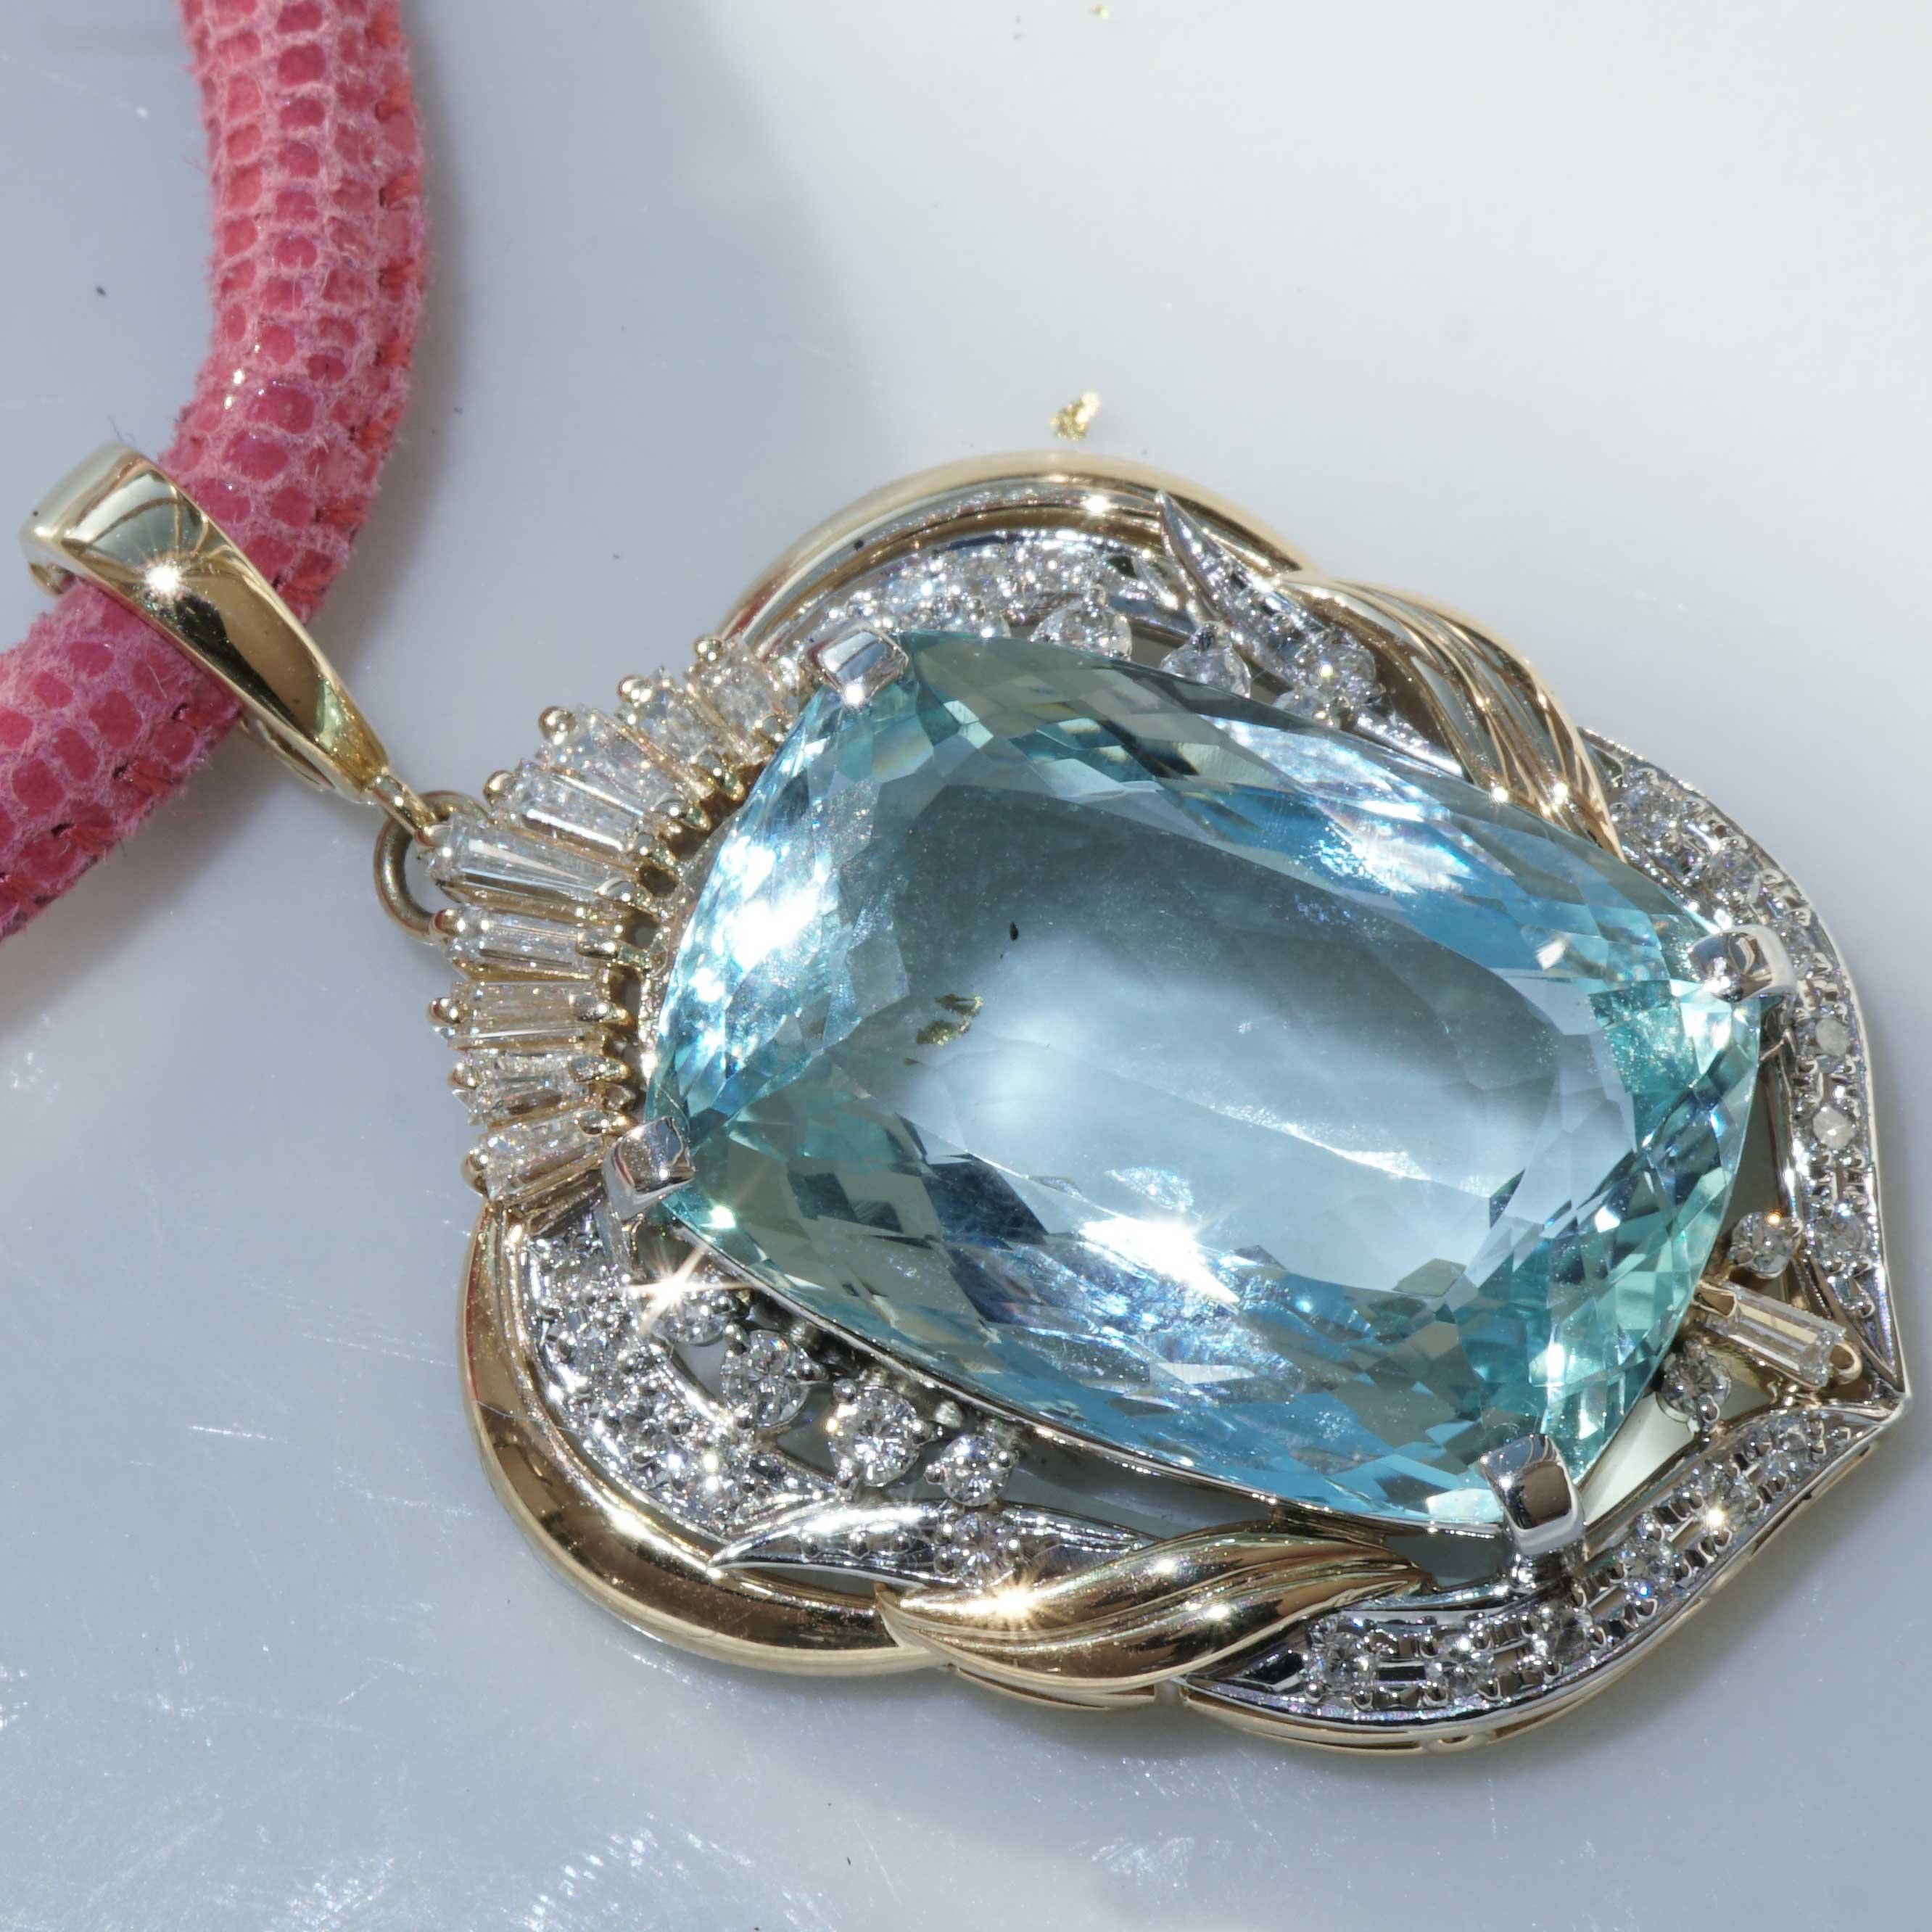 Pear Cut Aquamarine Brilliant Clip Pendant 24.5 0.83 ct this Color is rare and demanded For Sale